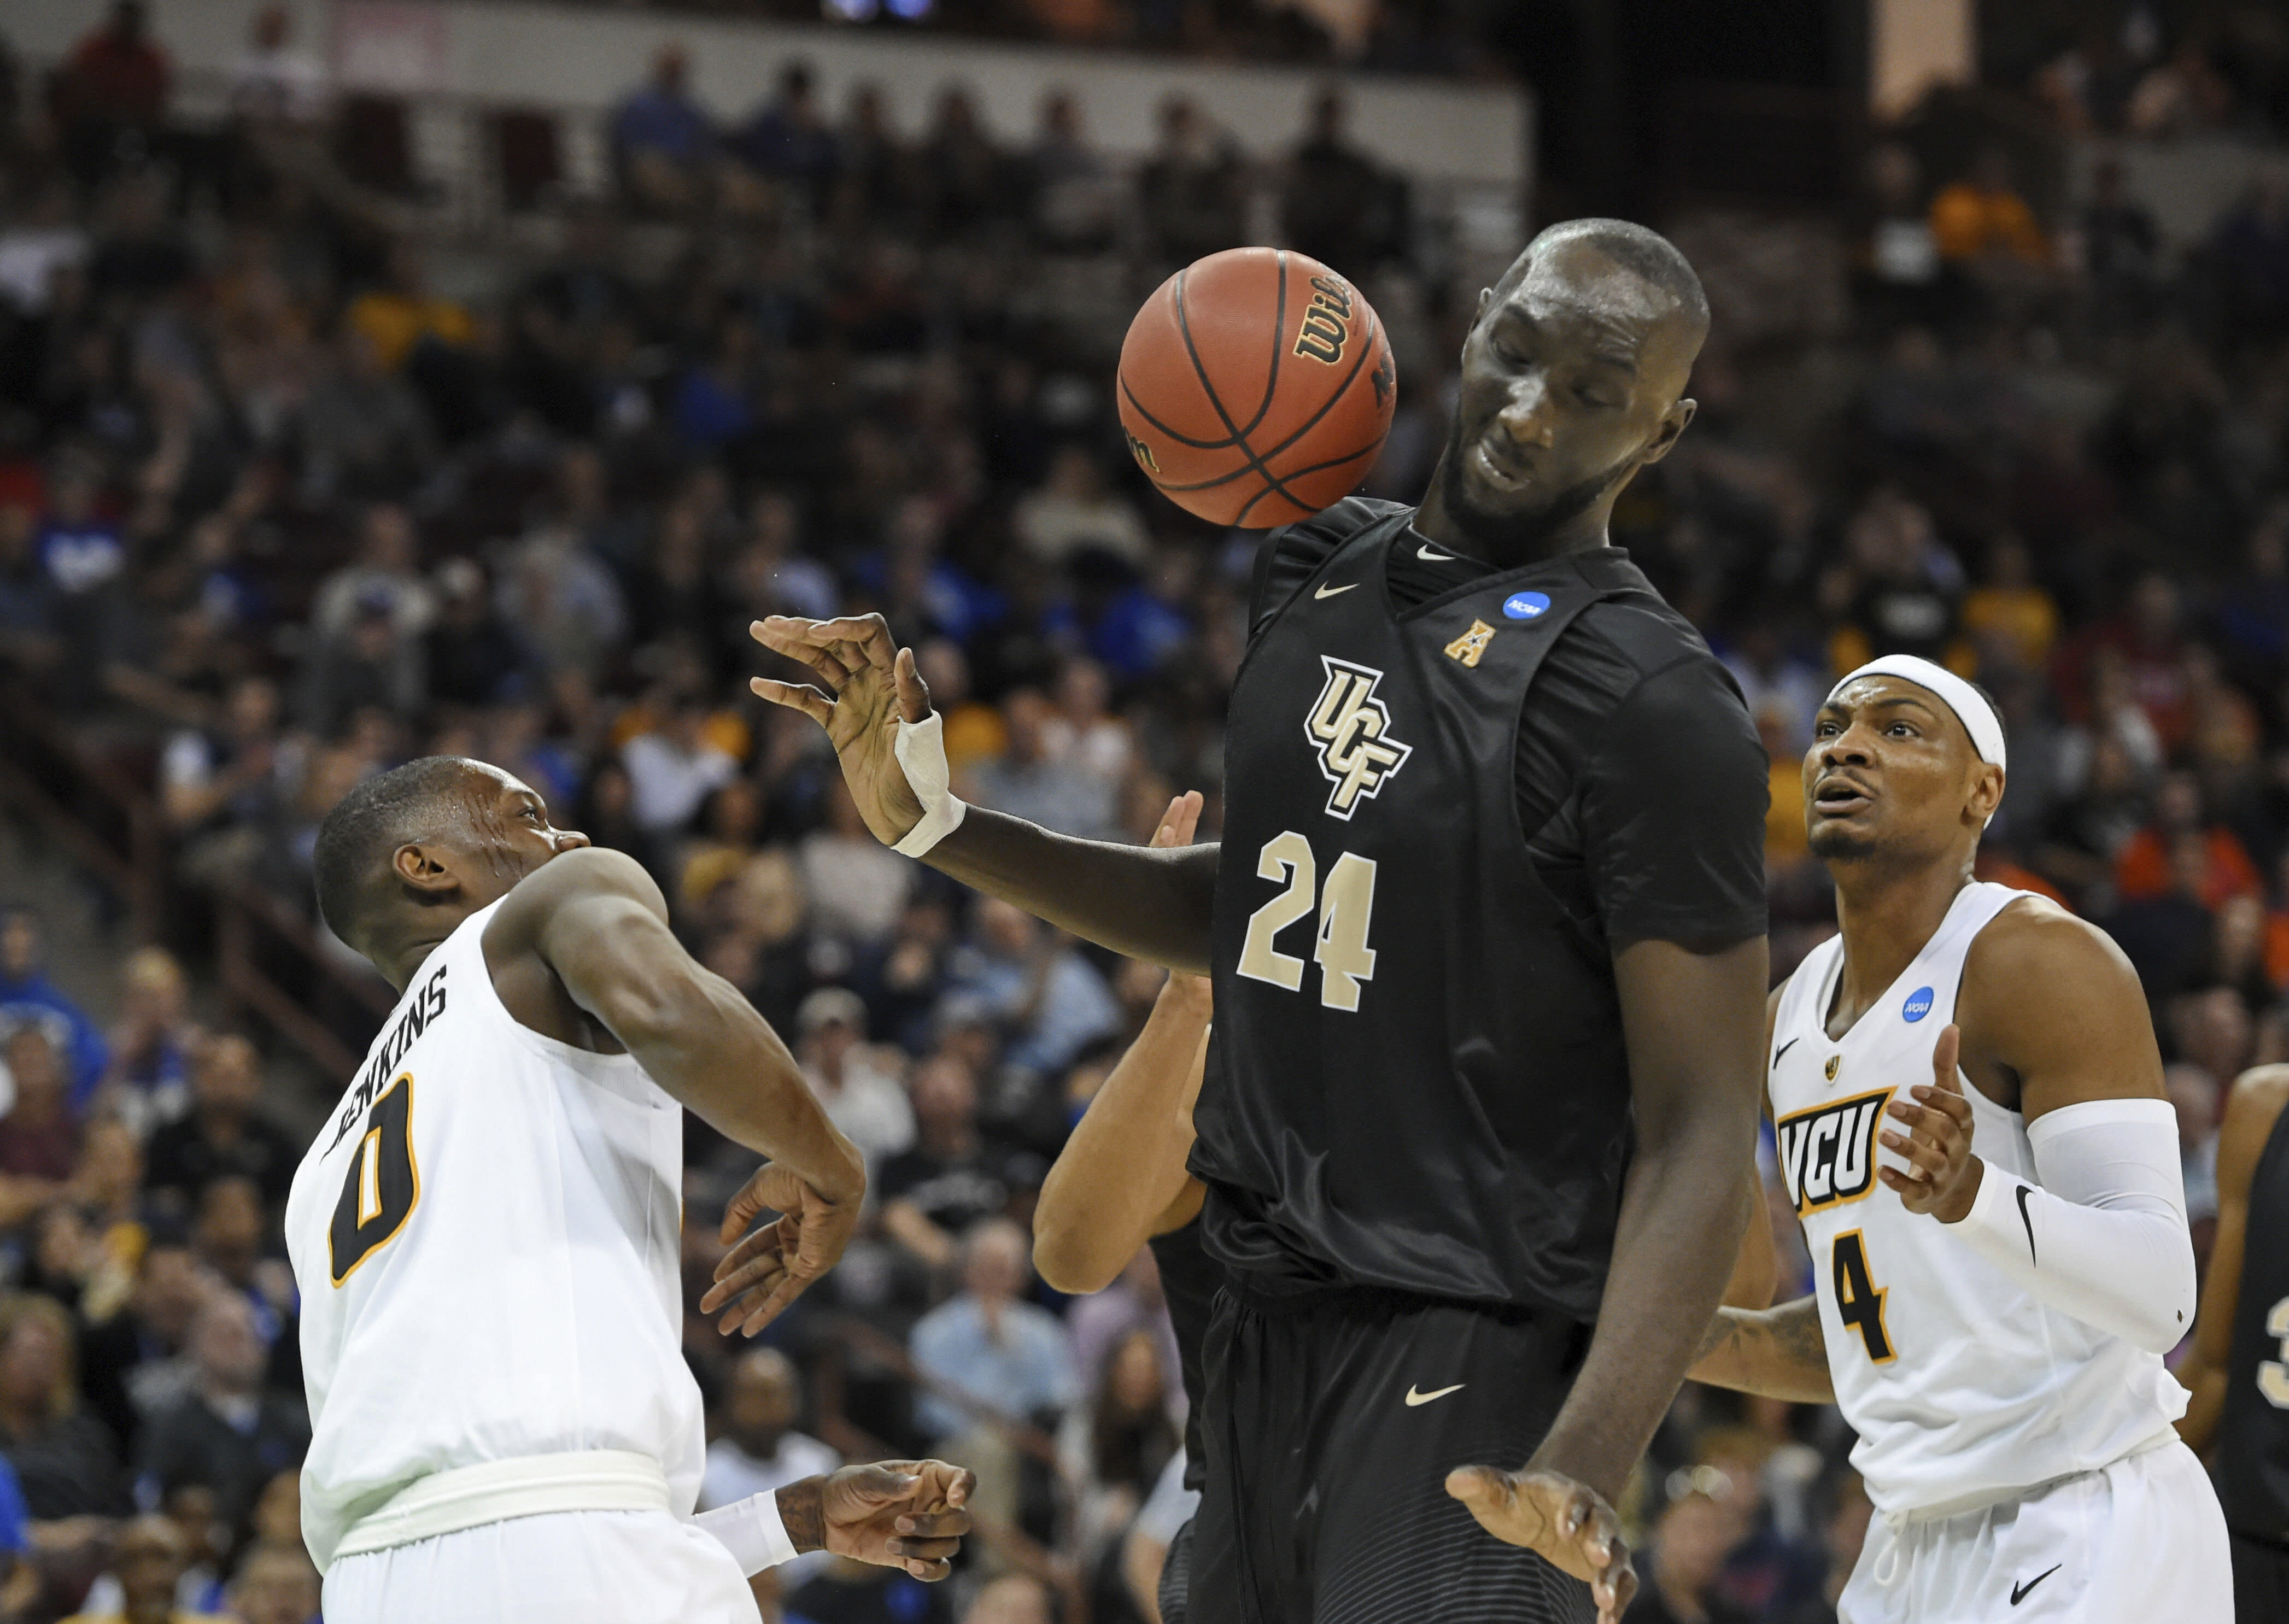 You can now bet on whether Zion Williamson posterizes Tacko Fall